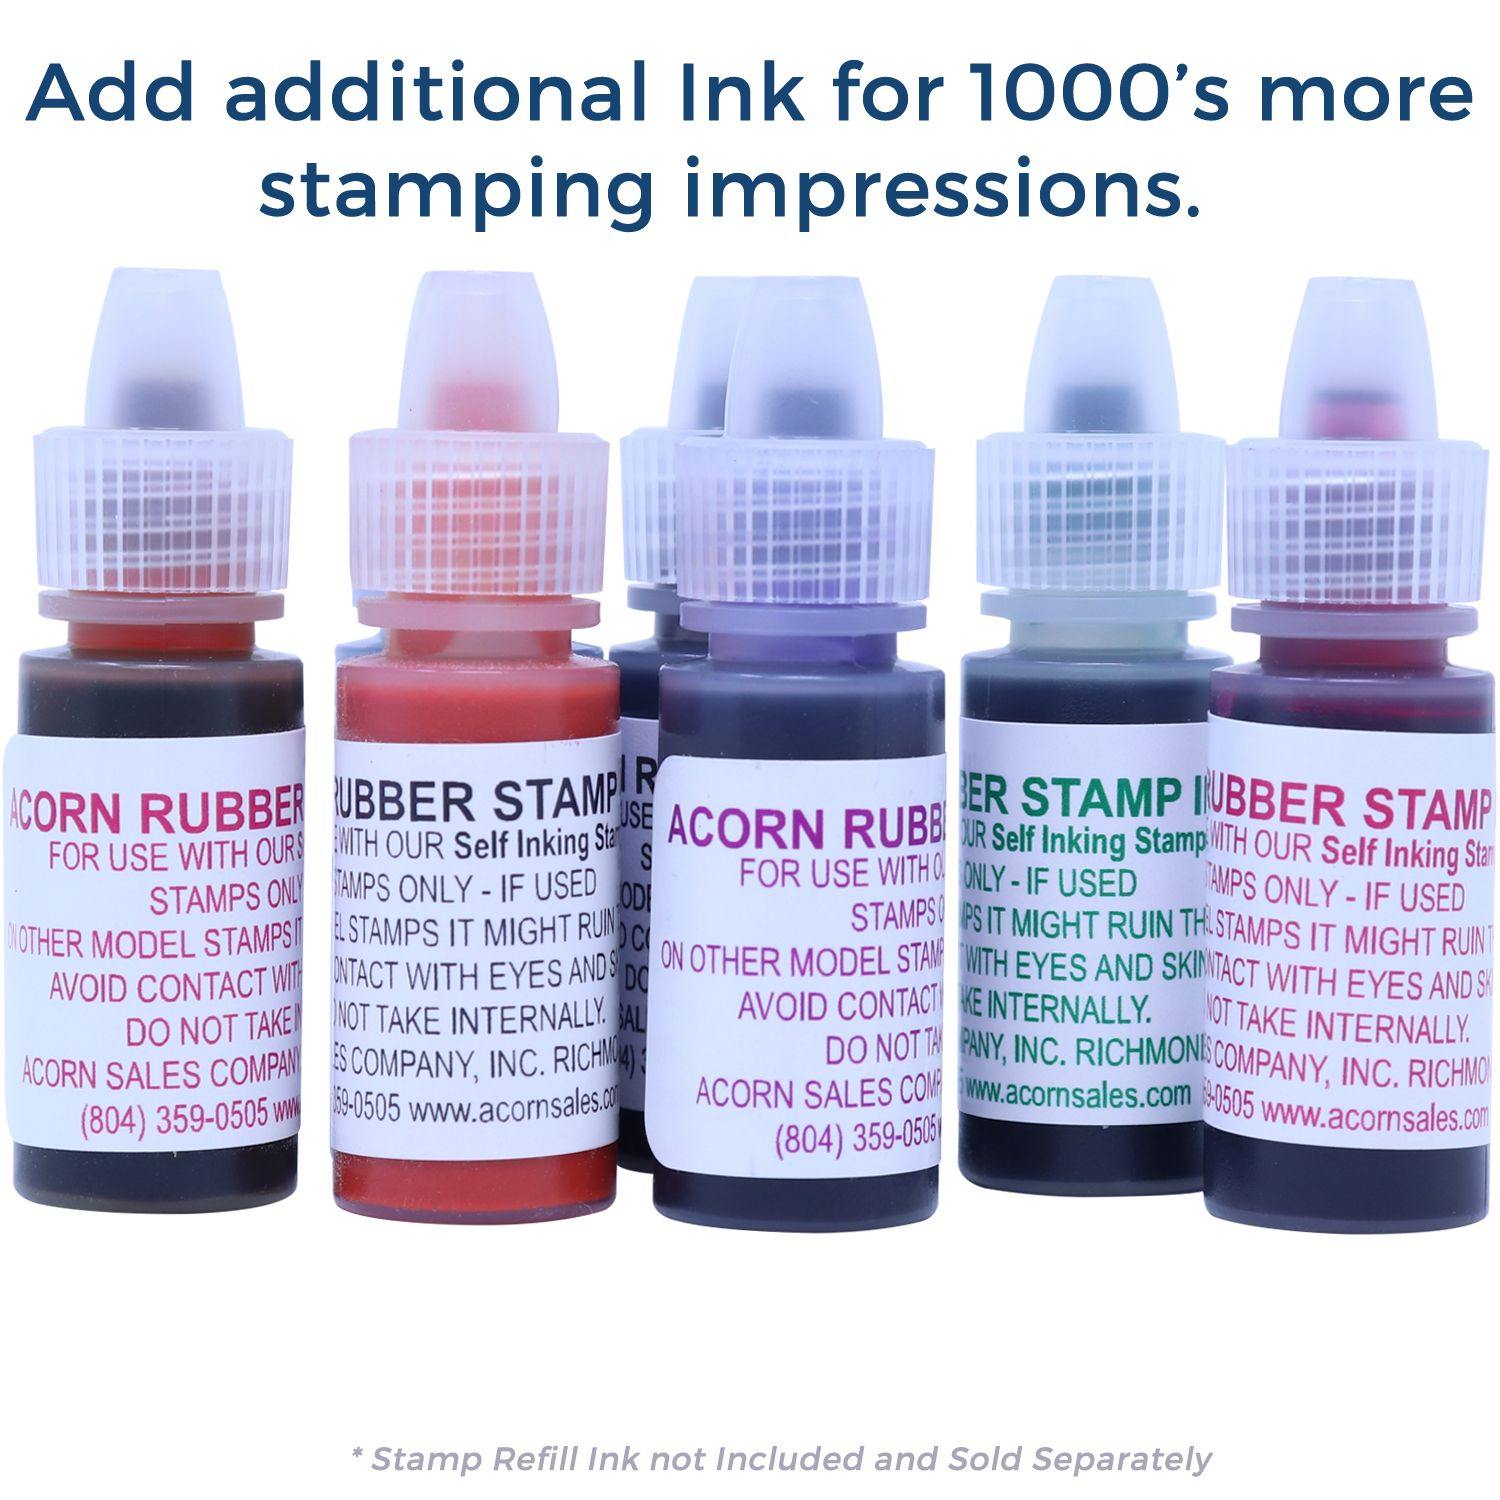 Refill Inks for Slim Pre-Inked Narrow Font Return Receipt Requested Stamp Available